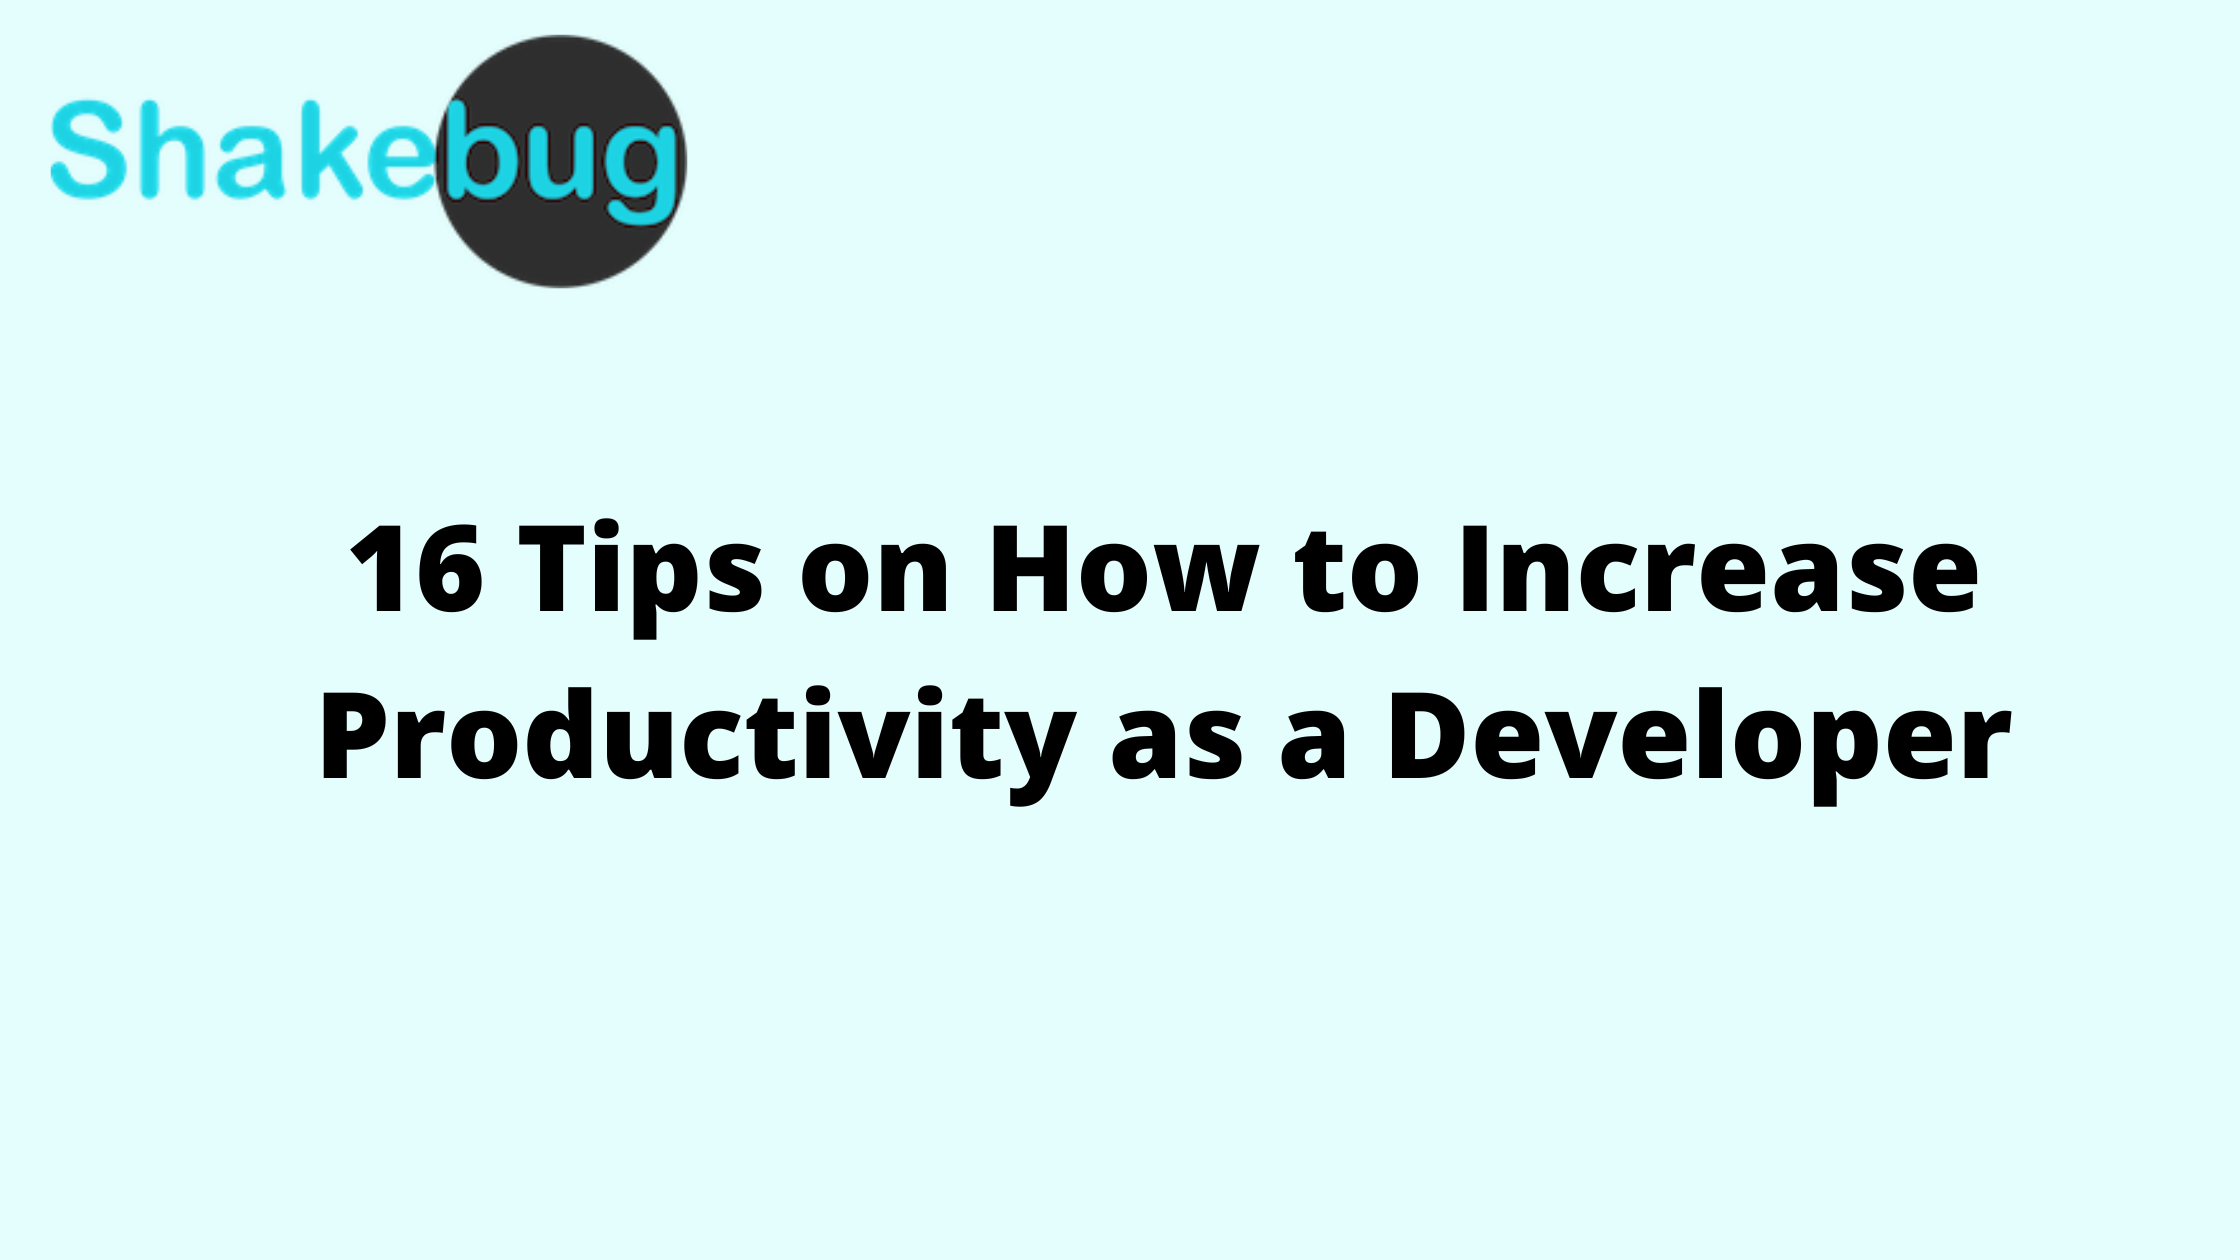 16 Tips on How to Increase Productivity as a Developer